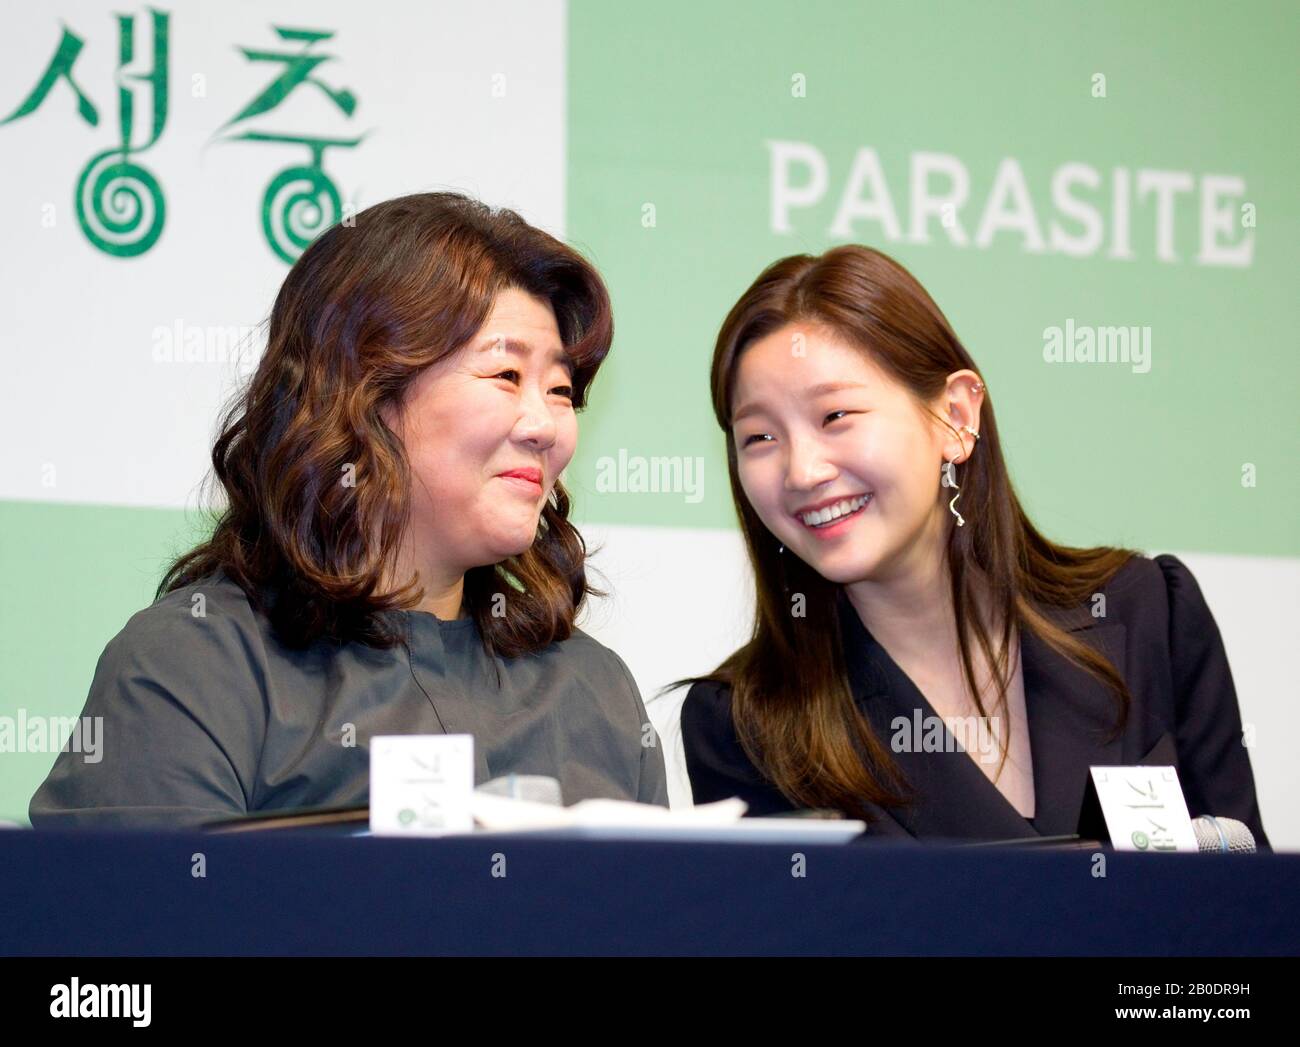 Lee Jung-Eun and Park So-Dam, Feb 19, 2020 : South Korean actresses Lee Jung-Eun (L) and Park So-Dam, cast members of the Oscar-winning film 'Parasite', attend a press conference in Seoul, South Korea. The Korean black comedy thriller won four Oscar titles at the Academy Awards on Feb 9, 2020, becoming the first non-English language film to win the Oscars Best Picture in its 92-year history. Credit: Lee Jae-Won/AFLO/Alamy Live News Stock Photo